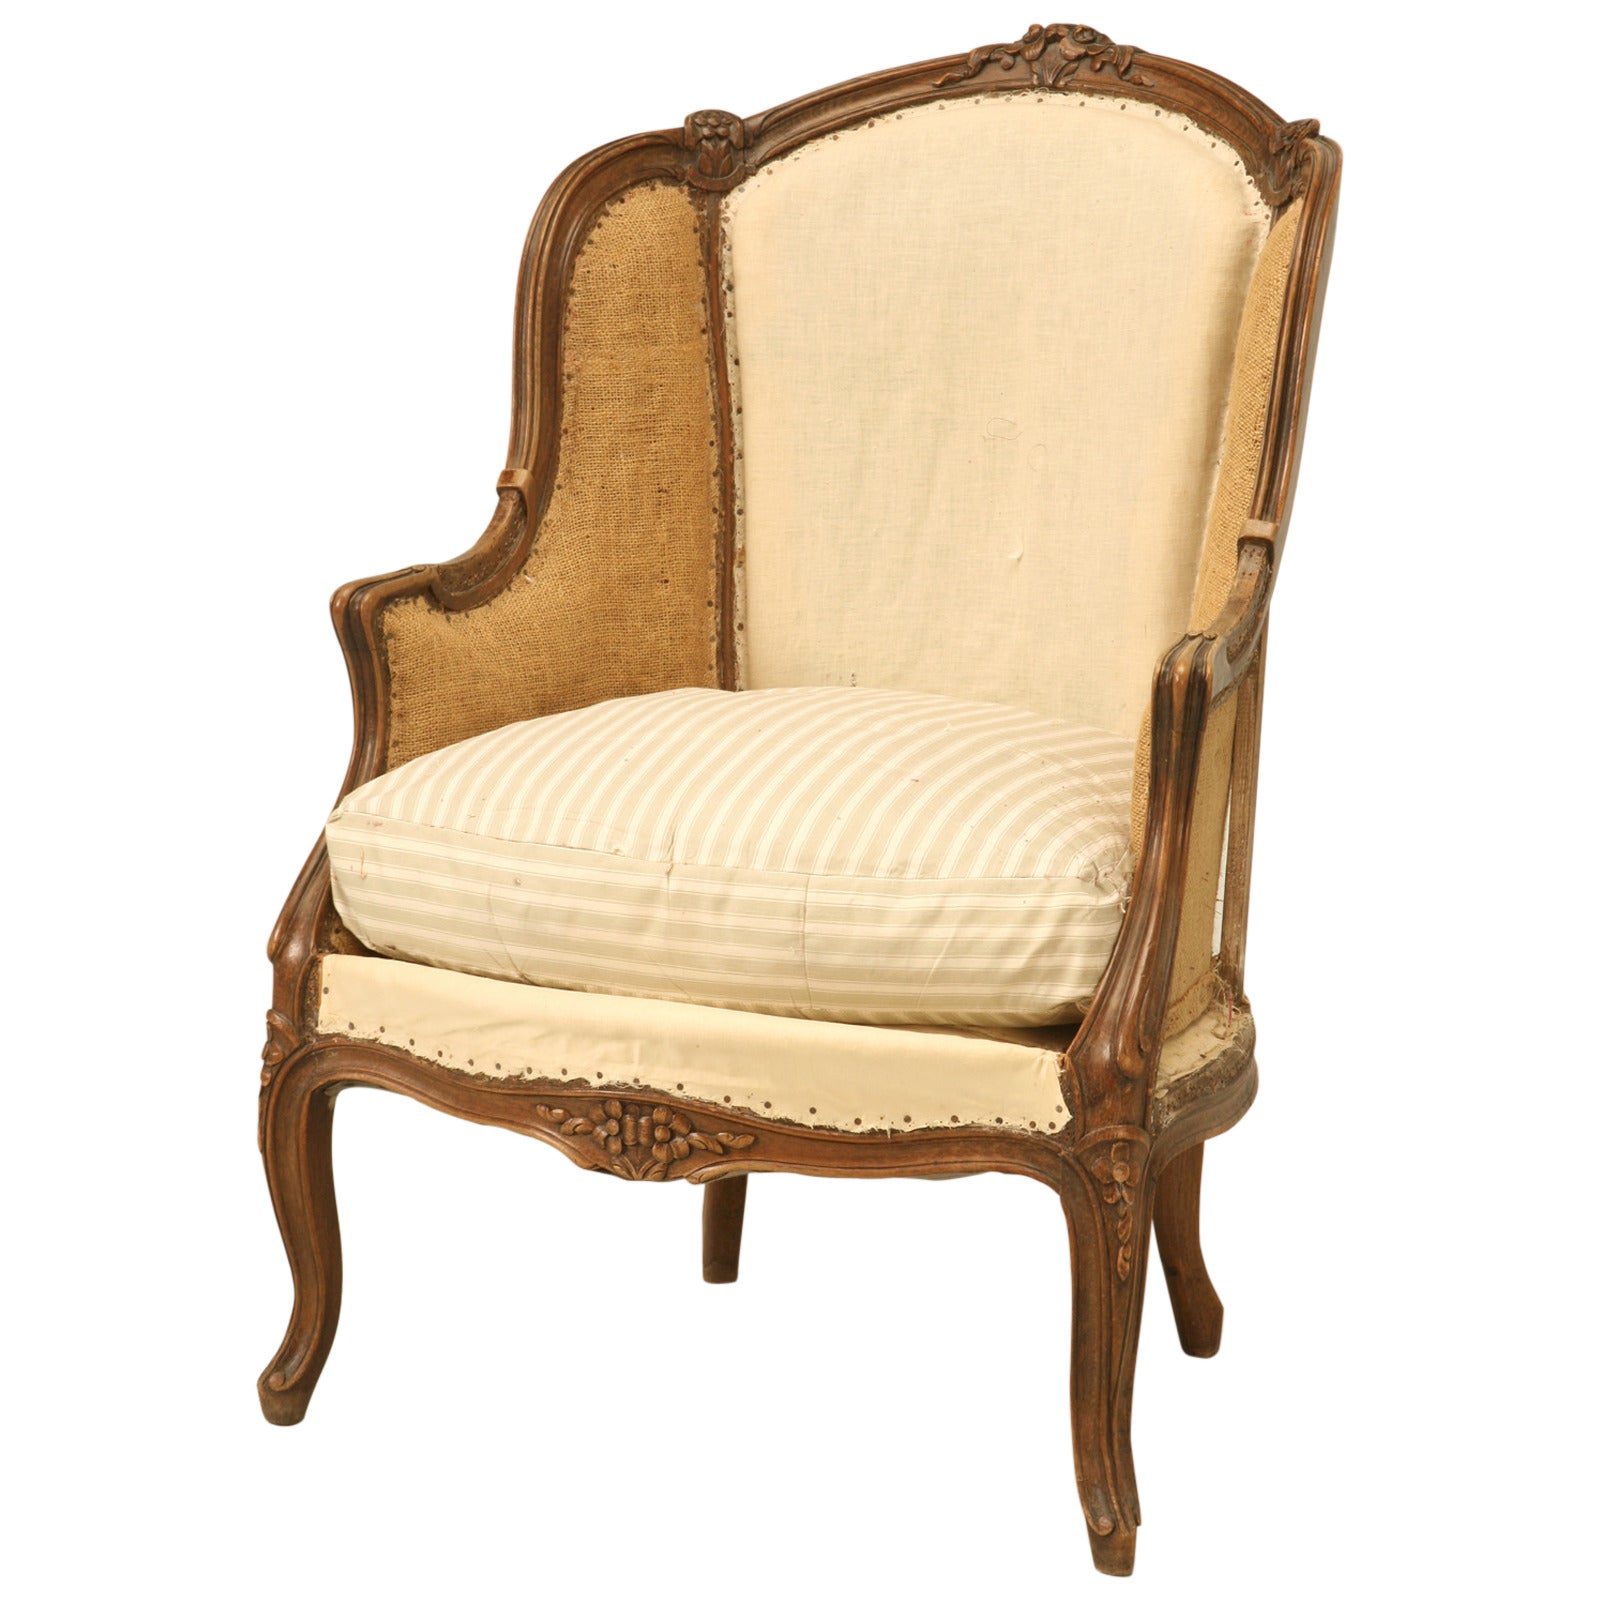 Antique French Hand-Carved Walnut Louis XV Style Chair, Down Cushion circa 1880s For Sale